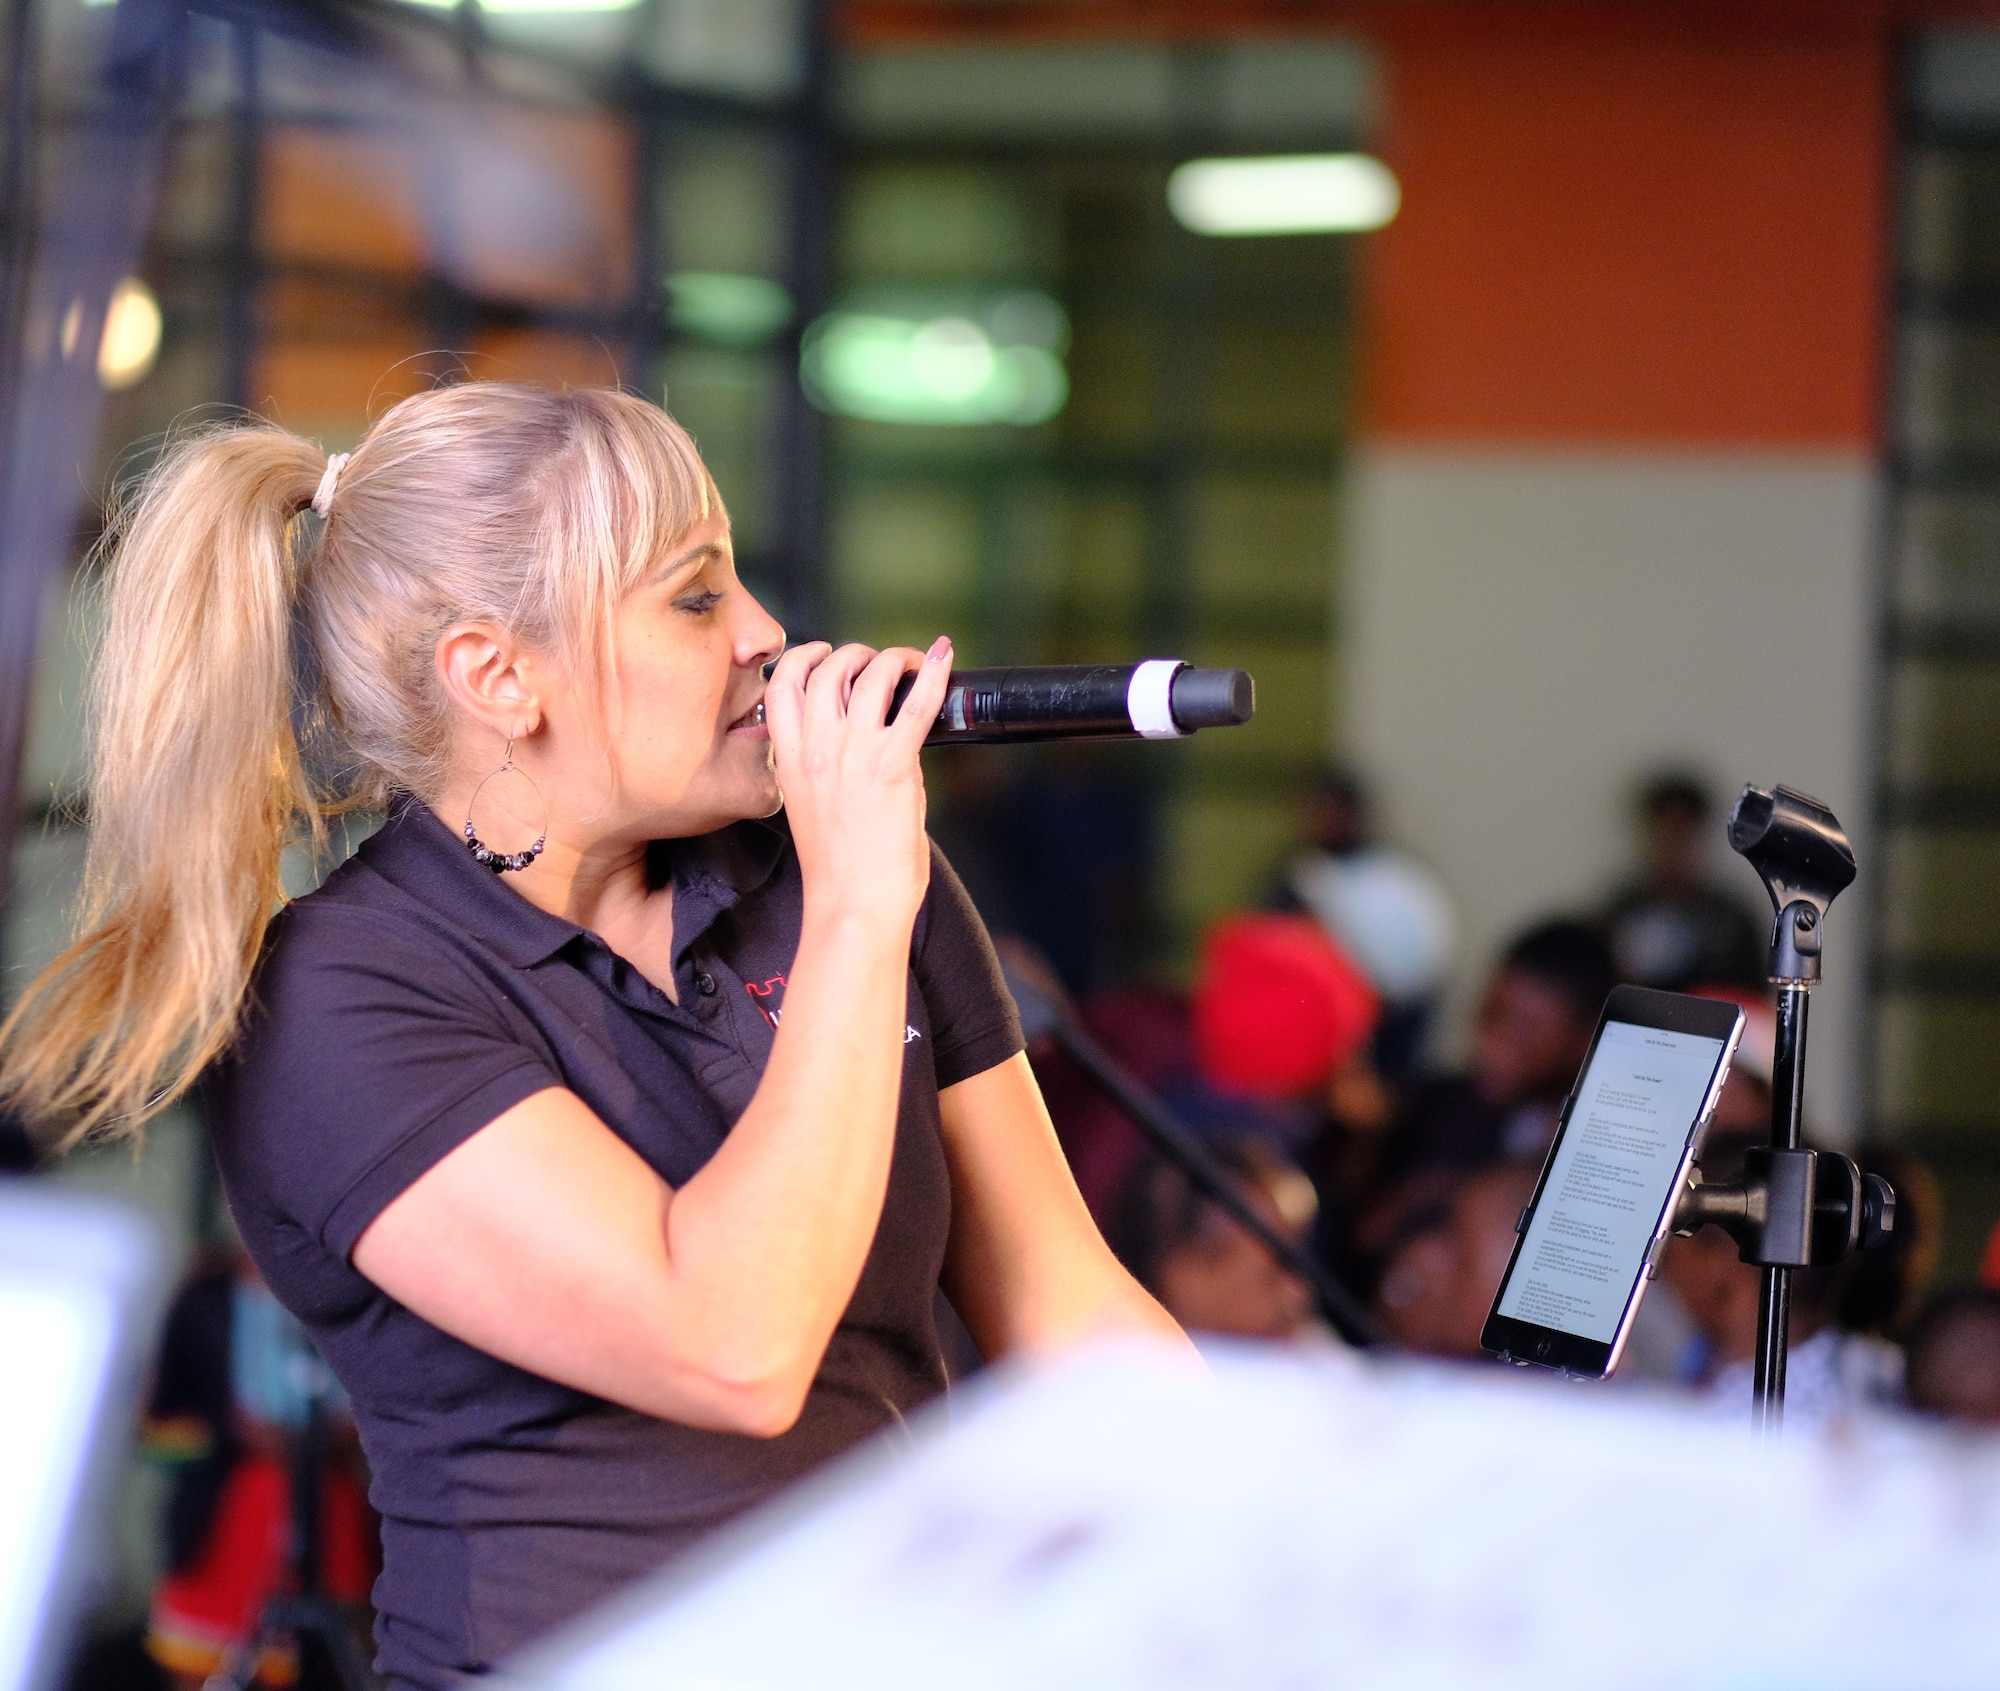 Senior Airman Linda Casul, the vocalist in the United States Air Forces in Europe -– Air Forces Africa band Touch ’n Go, sings for children during a concert at Ponte City in Johannesburg, South Africa, September 21, 2018. The band’s performance provides a unique opportunity for the U.S. to build strong ties with its African partners and their communities.  (US Army Photo by Staff Sgt. Jeffery Sandstrum)